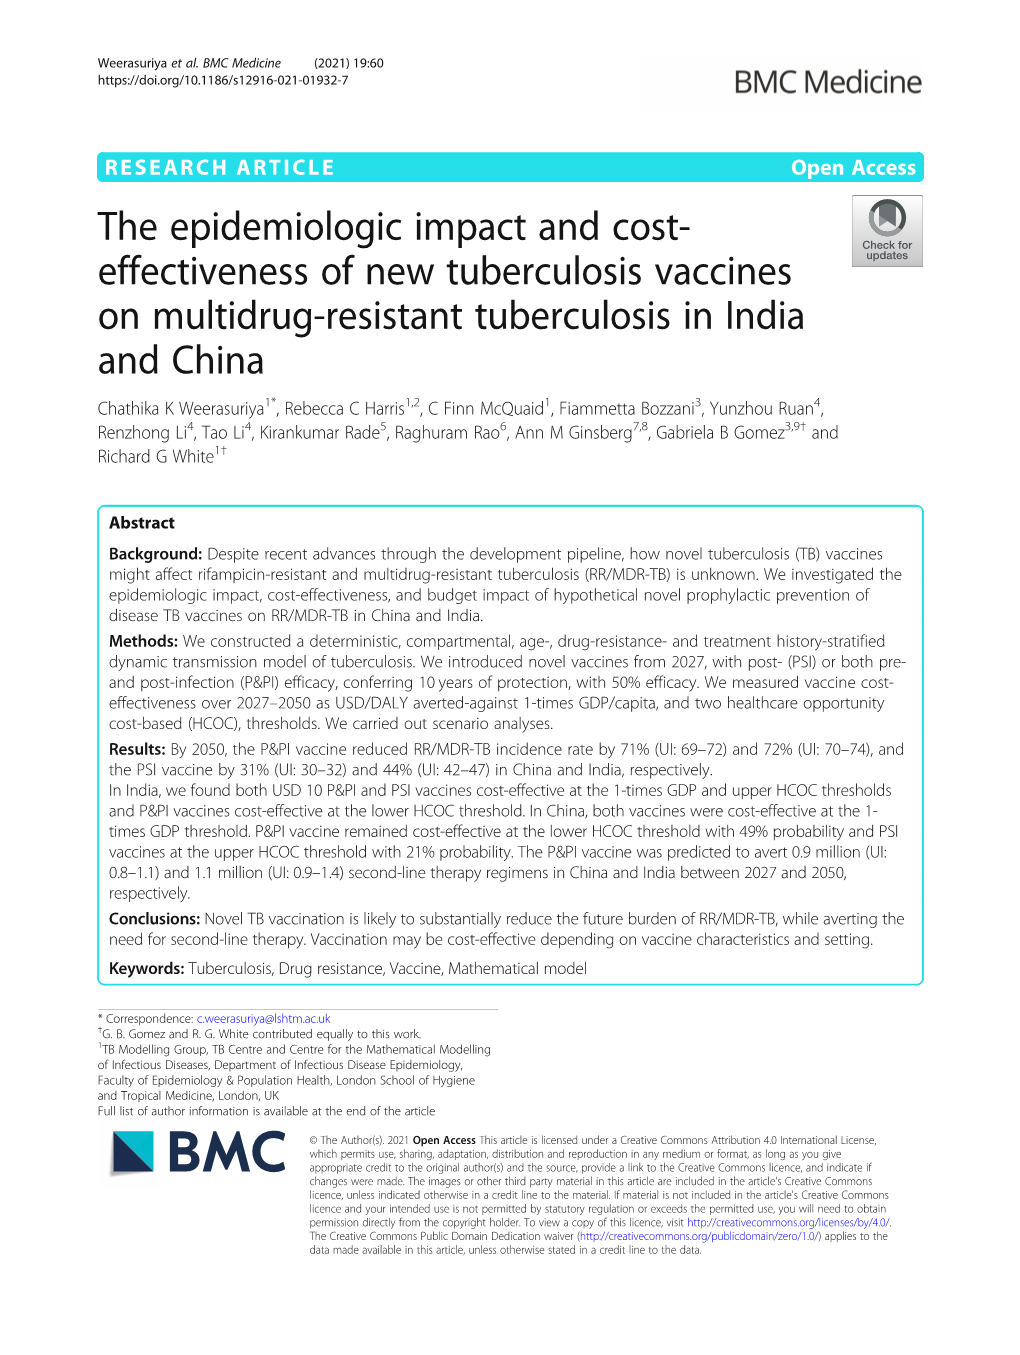 Effectiveness of New Tuberculosis Vaccines on Multidrug-Resistant Tuberculosis in India and China